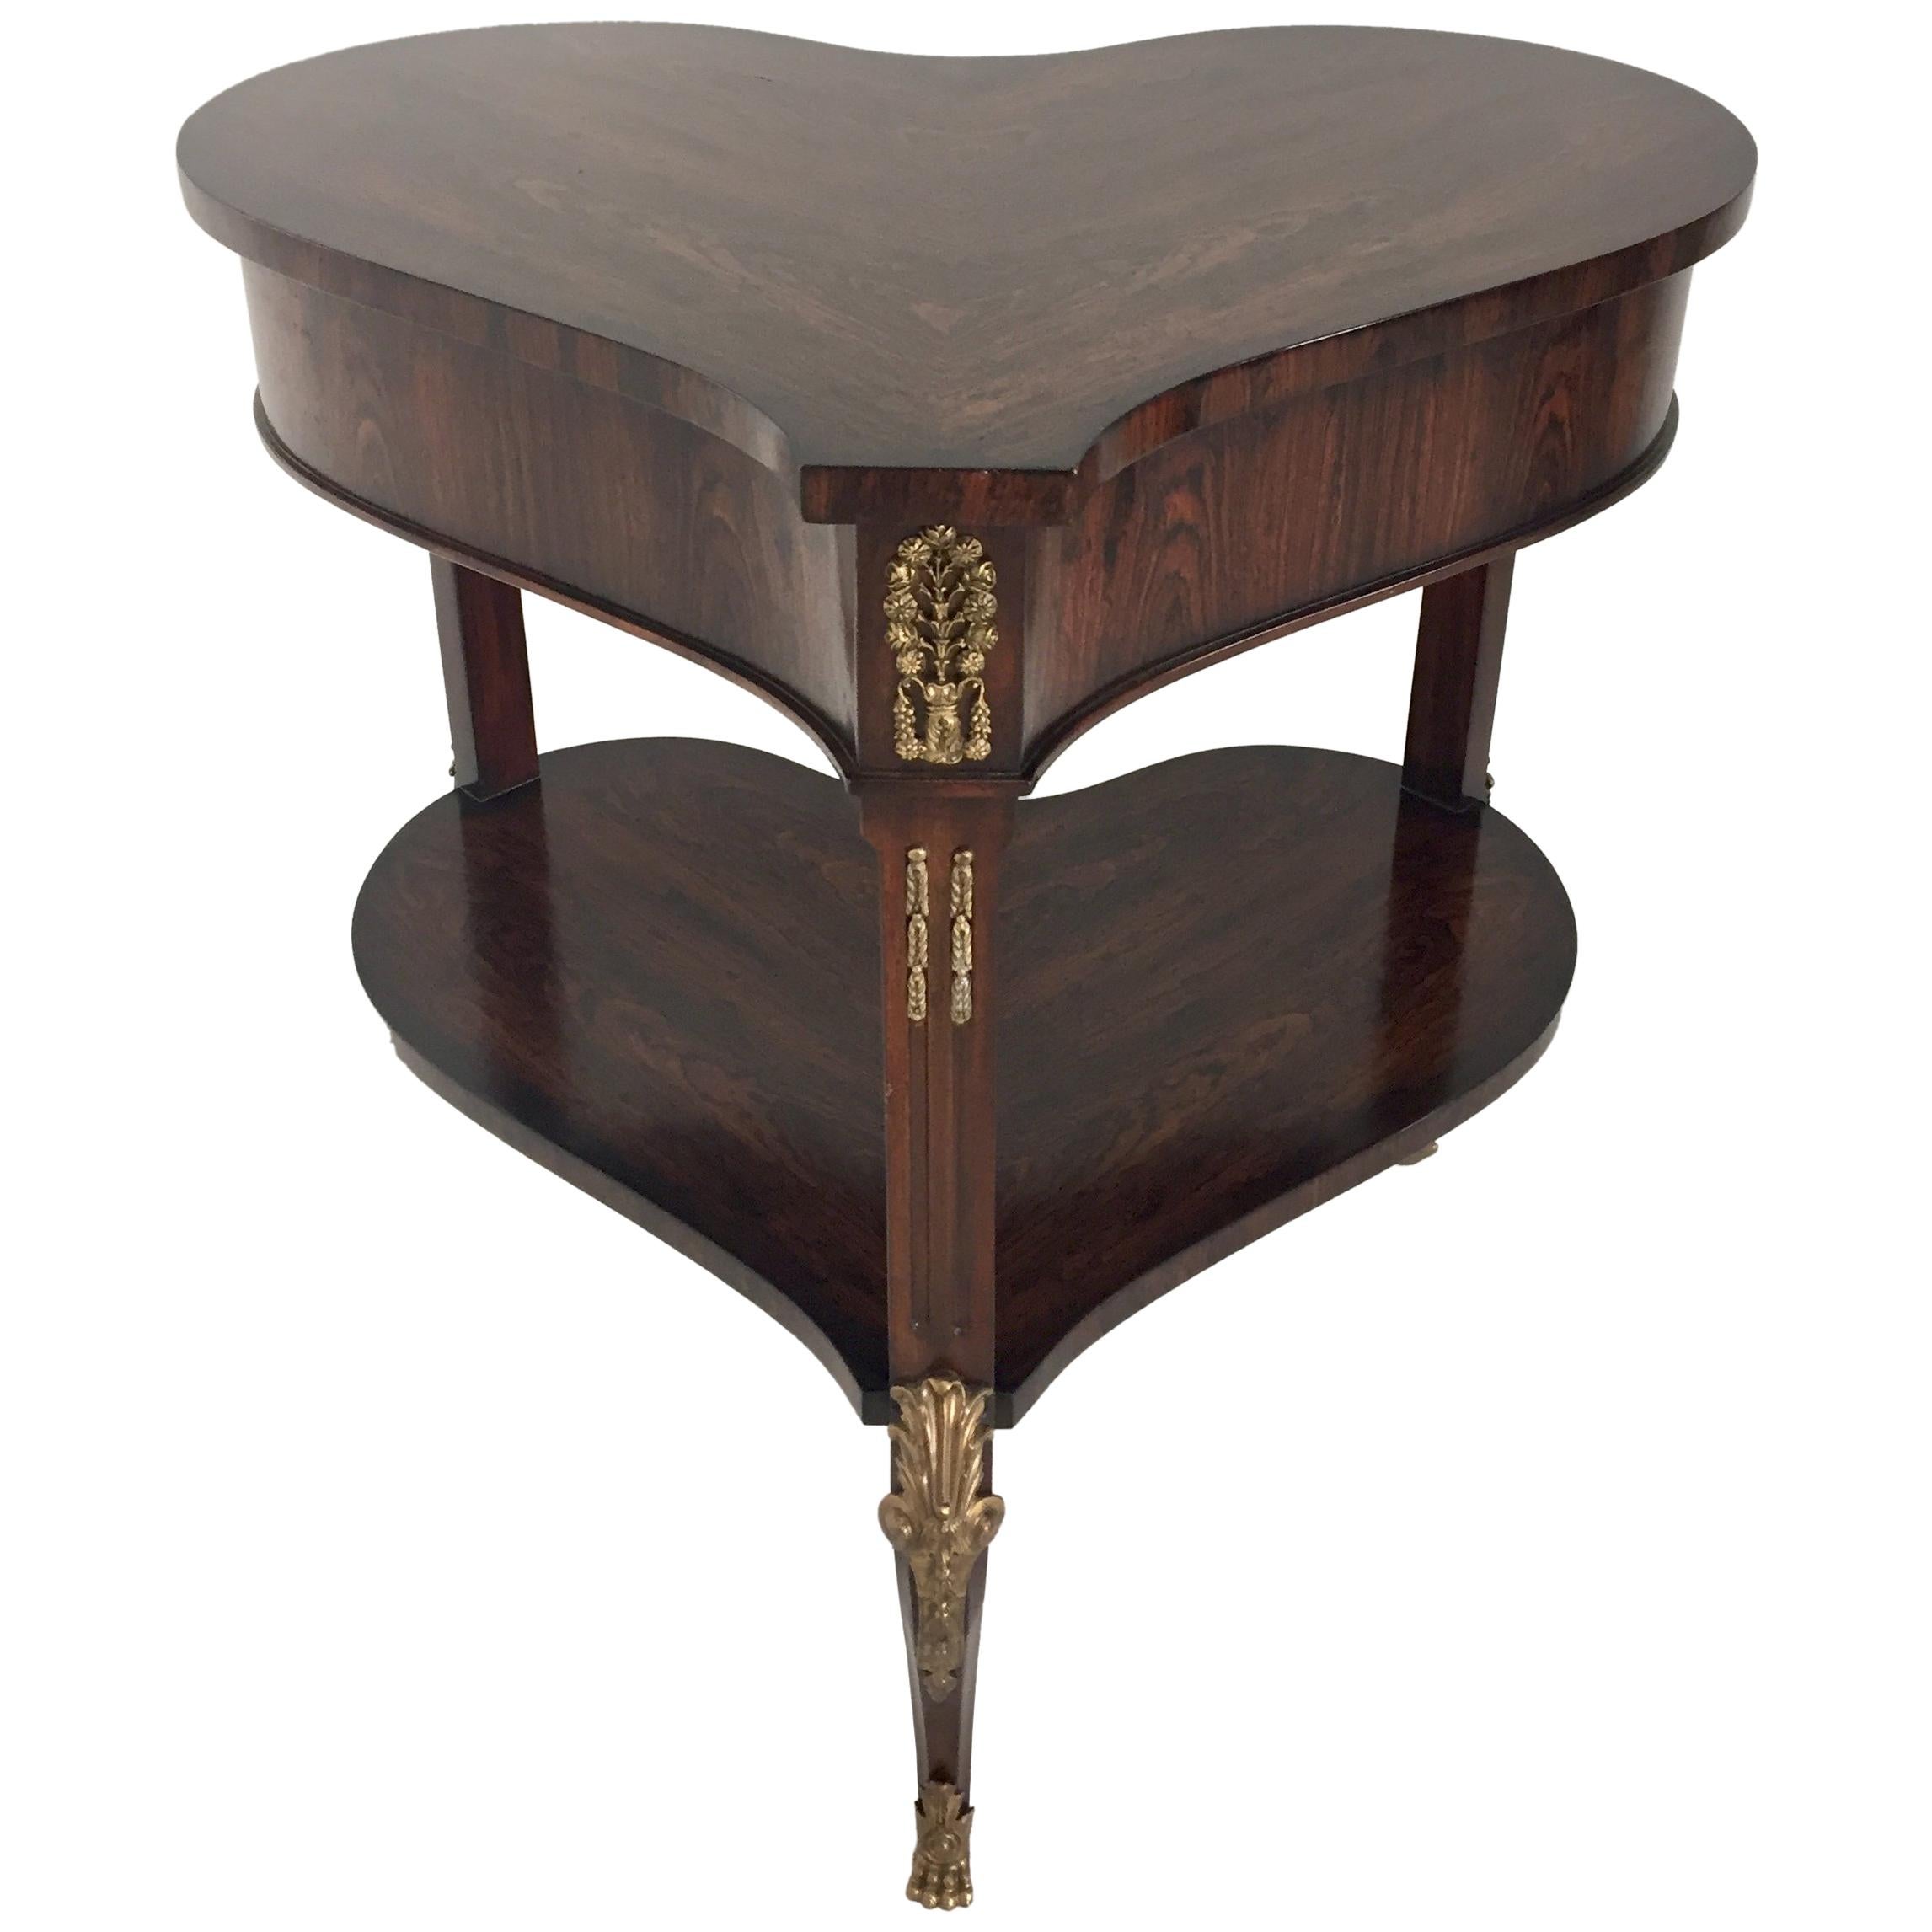 Delightful Heart Shaped Mahogany Two-Tier Side Table by Theodore Alexander